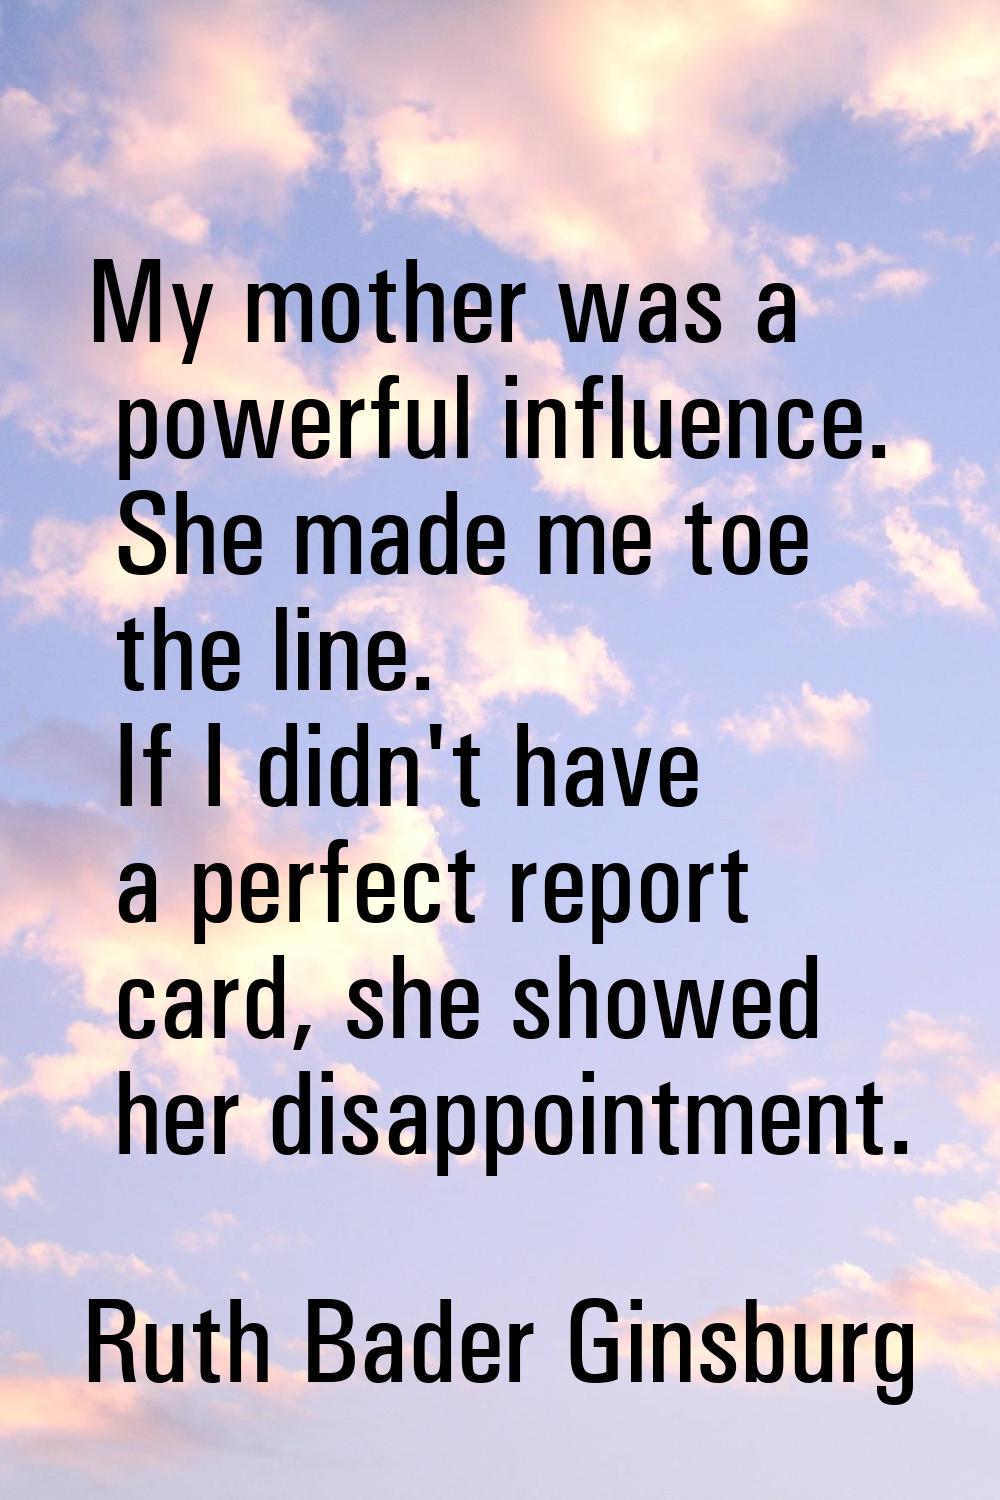 My mother was a powerful influence. She made me toe the line. If I didn't have a perfect report car